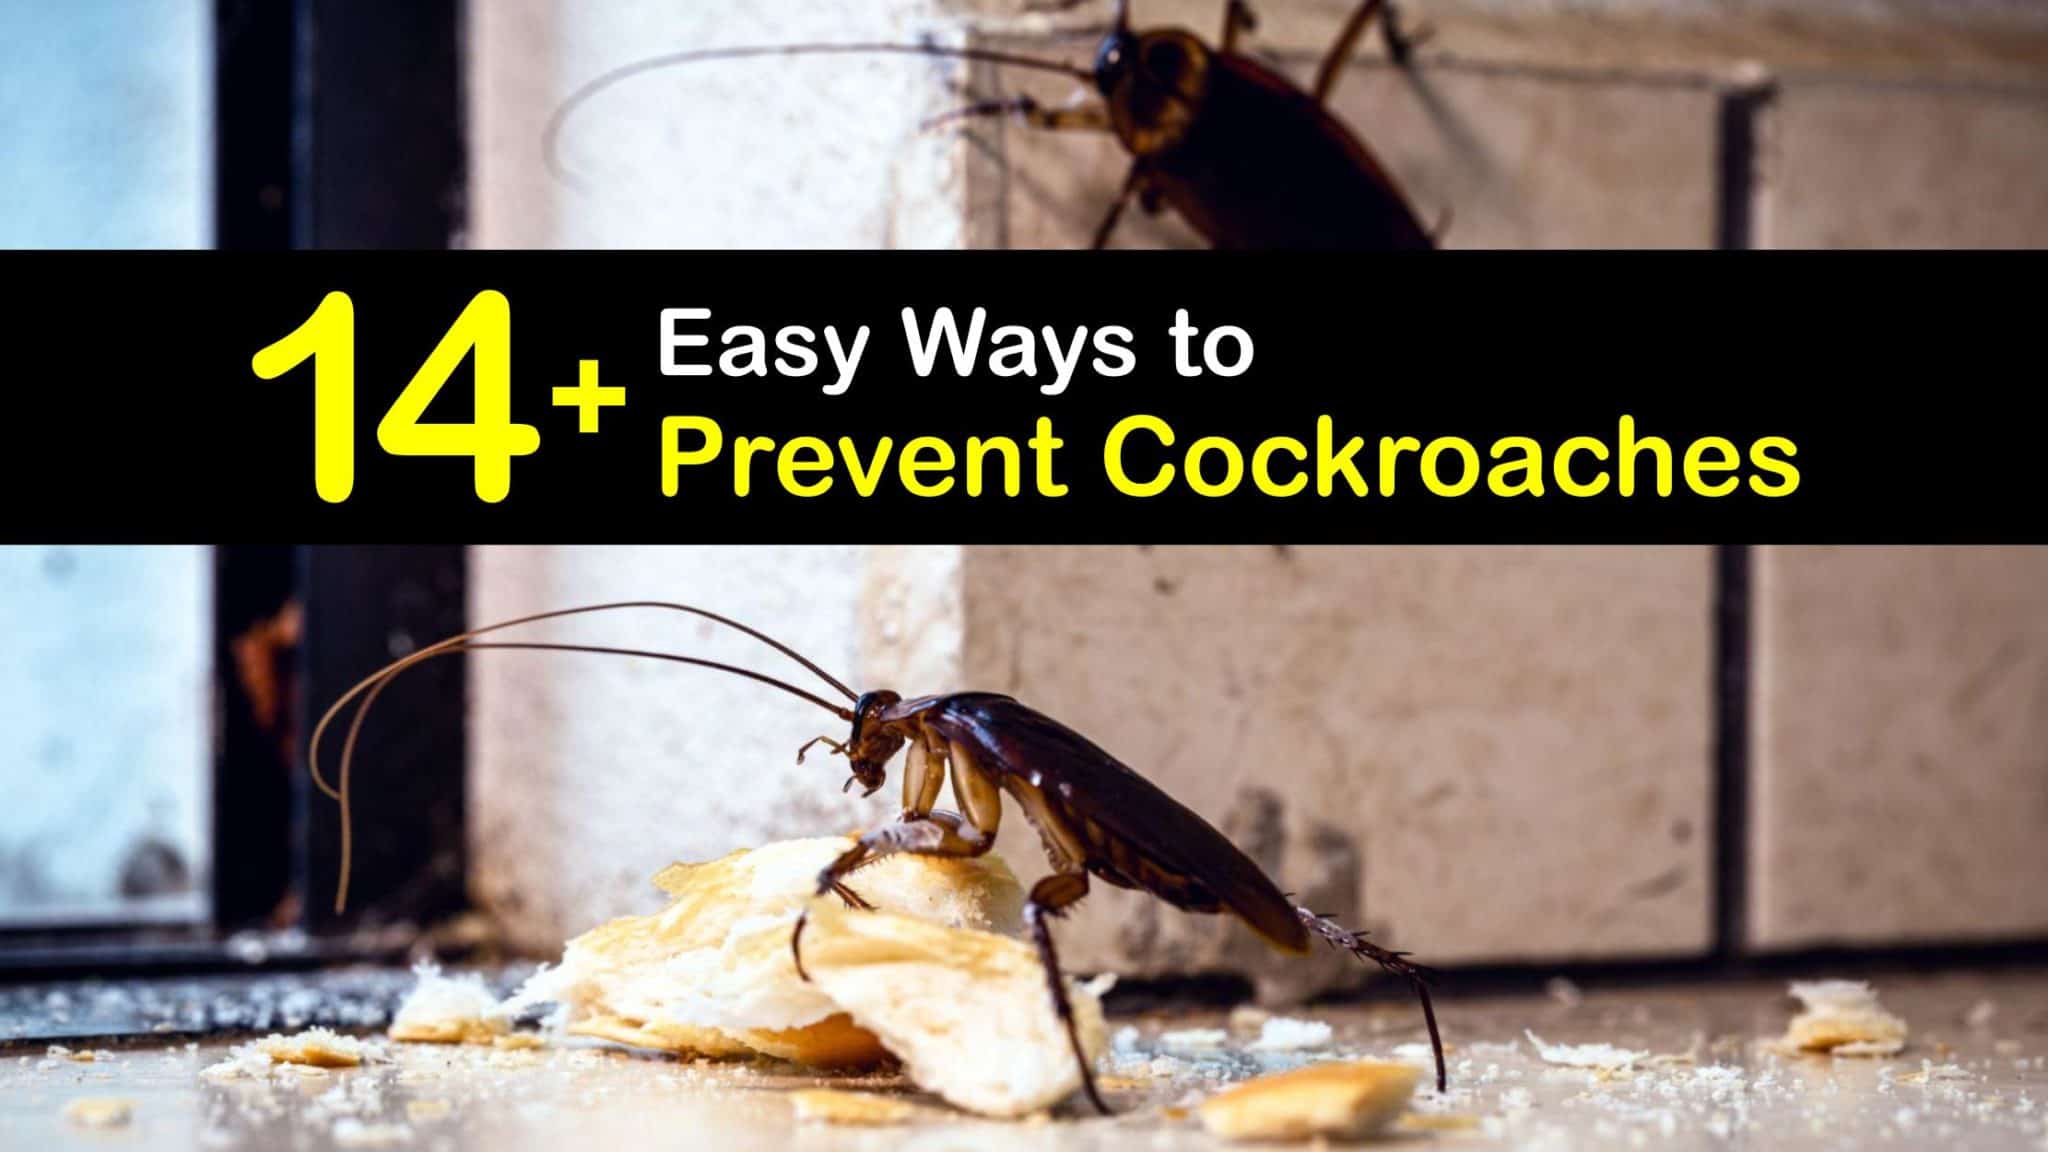 Preventing Cockroaches - Easy Ways to Implement Roach Control